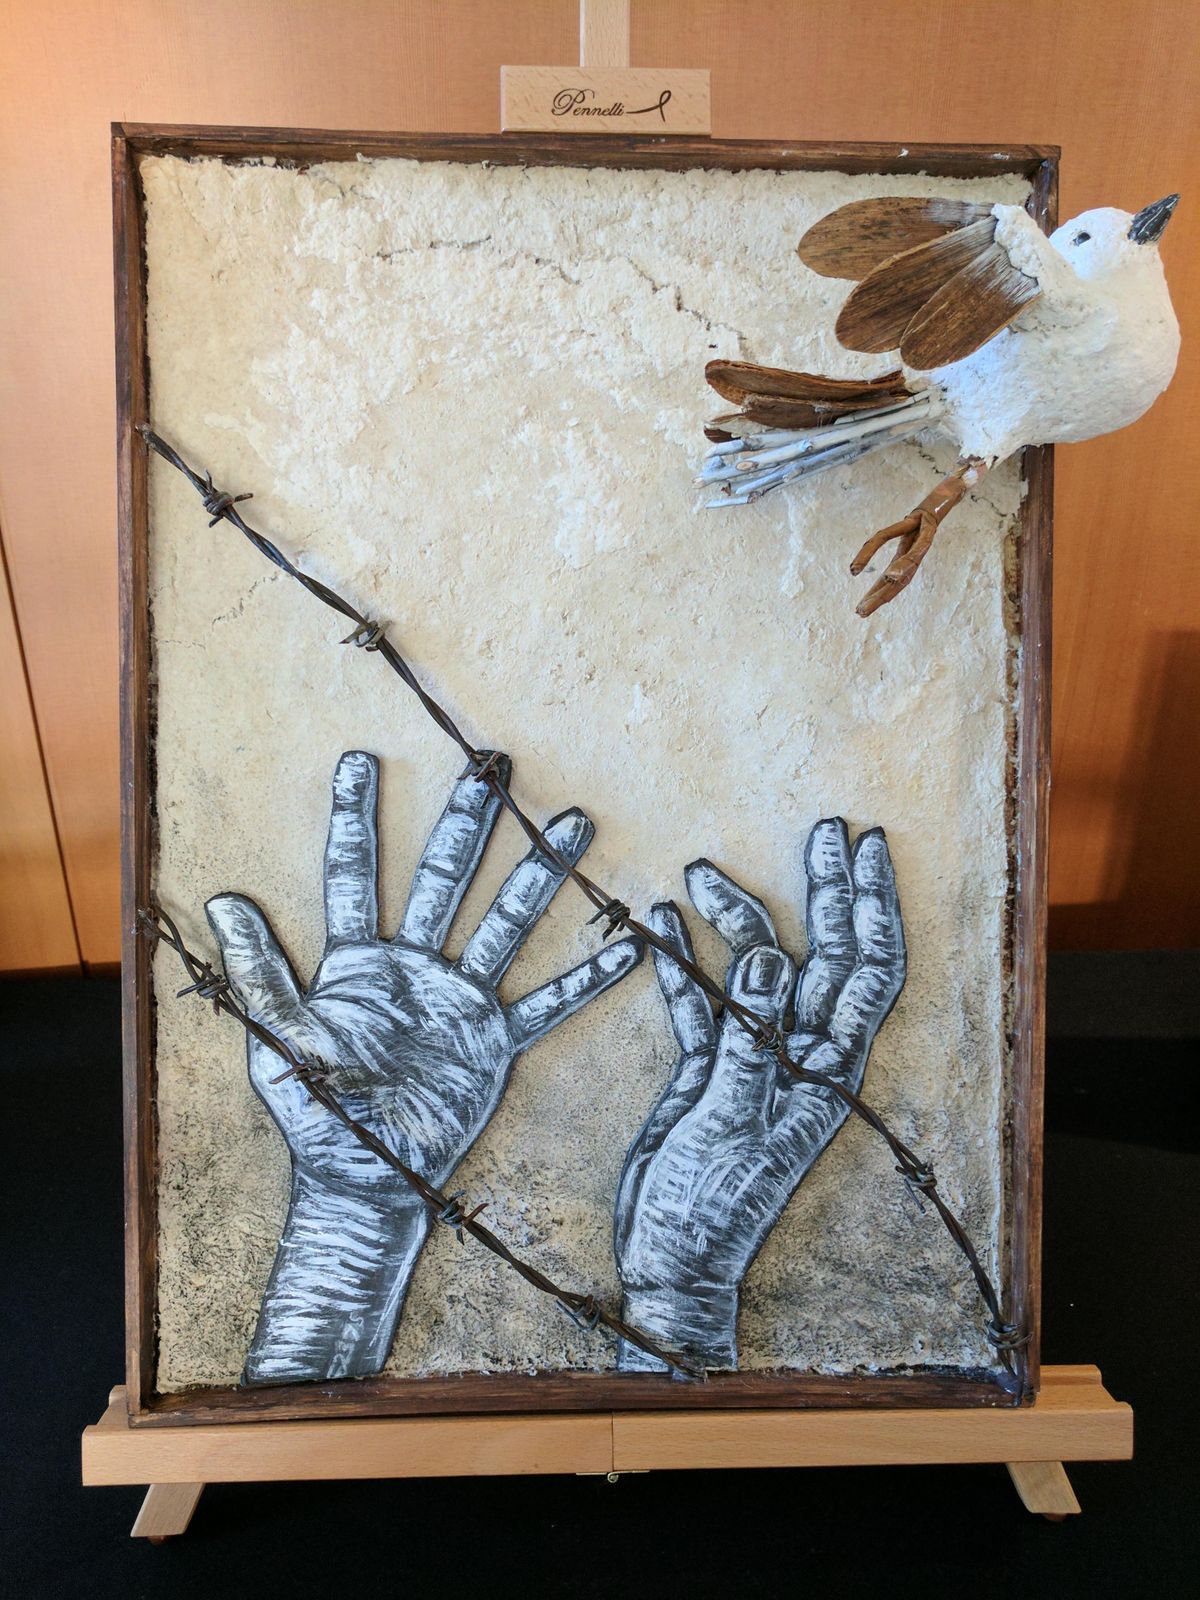 Margo Sophie Hawkins, seventh-grader at the Odyssey Program at Libby Center, won first place for “The Messenger.” Here’s her artist statement: My piece depicts a pair of hands releasing a bird, symbolic of a message being sent or the truth being spread. The bird is meant to show a desperate attempt by the oppressed to break down the walls of propaganda that had blinded the people and nations of the world. The bird was inspired by the fact that messenger pigeons were used by American soldiers in World War II. The band on its leg resembles the arm bands Jews were forced to wear in the cities as identification to the Nazis. My piece is constructed of found objects and papier-mâché. (Spokane Community Observance of the Holocaust)